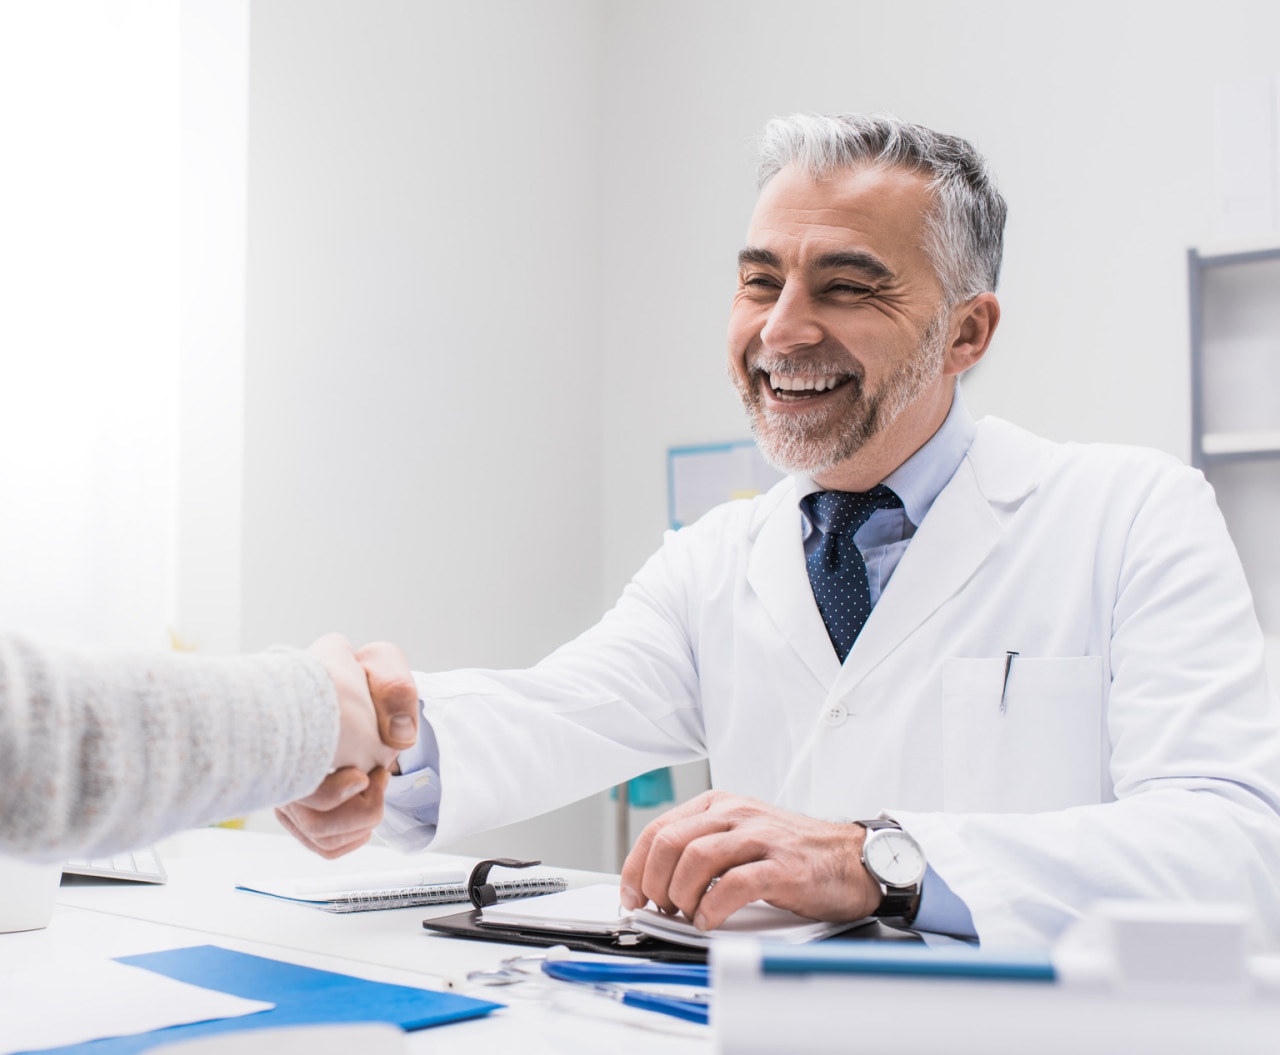 Smiling doctor and female patient shaking hands, healthcare professionals concept